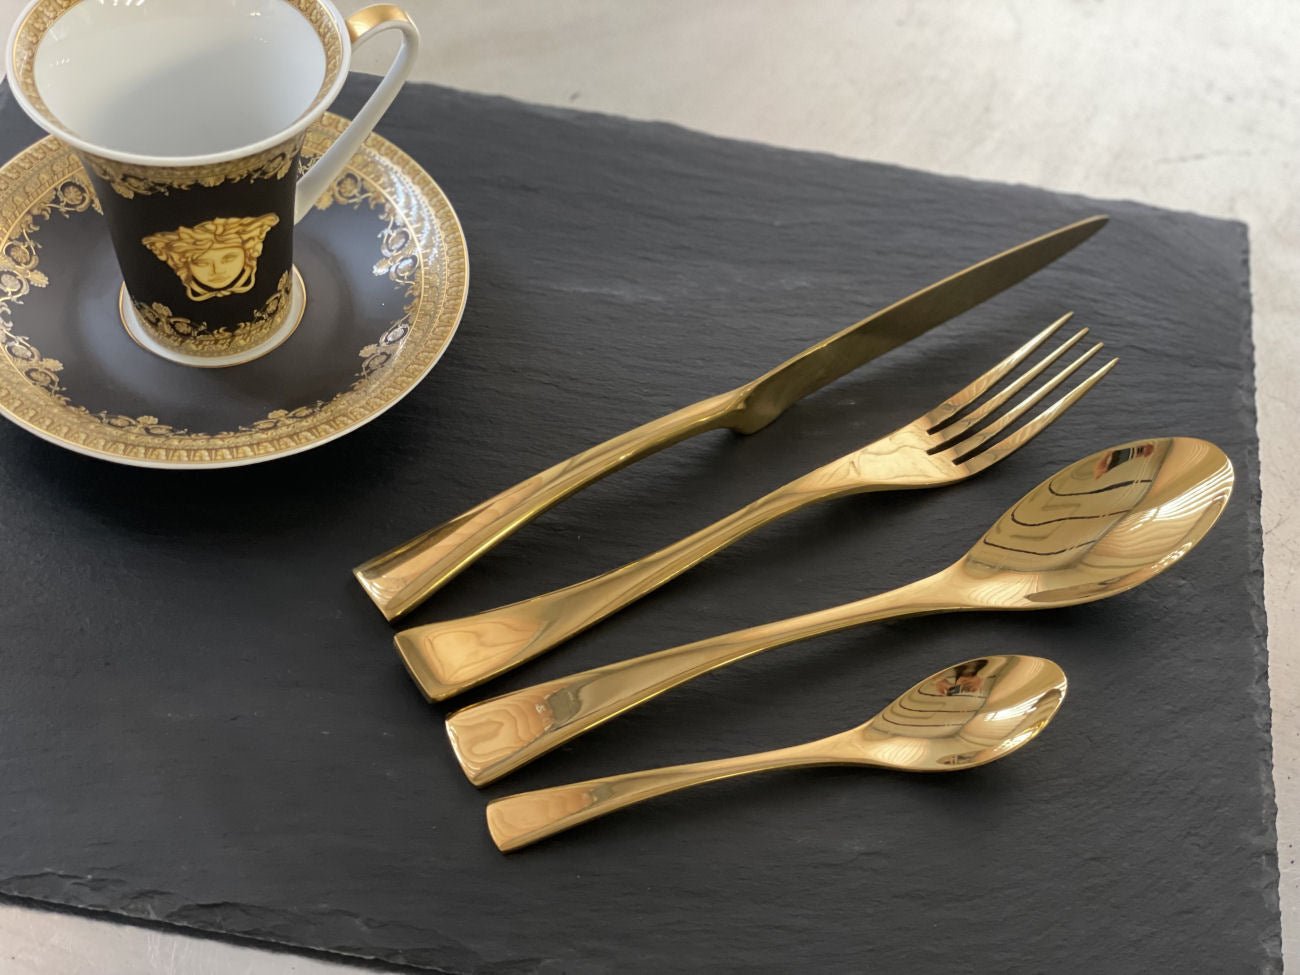 1 Set of Luxury Gold Stainless Steel Design Cutlery - |VESIMI Design| Luxury and Rustic bathrooms online